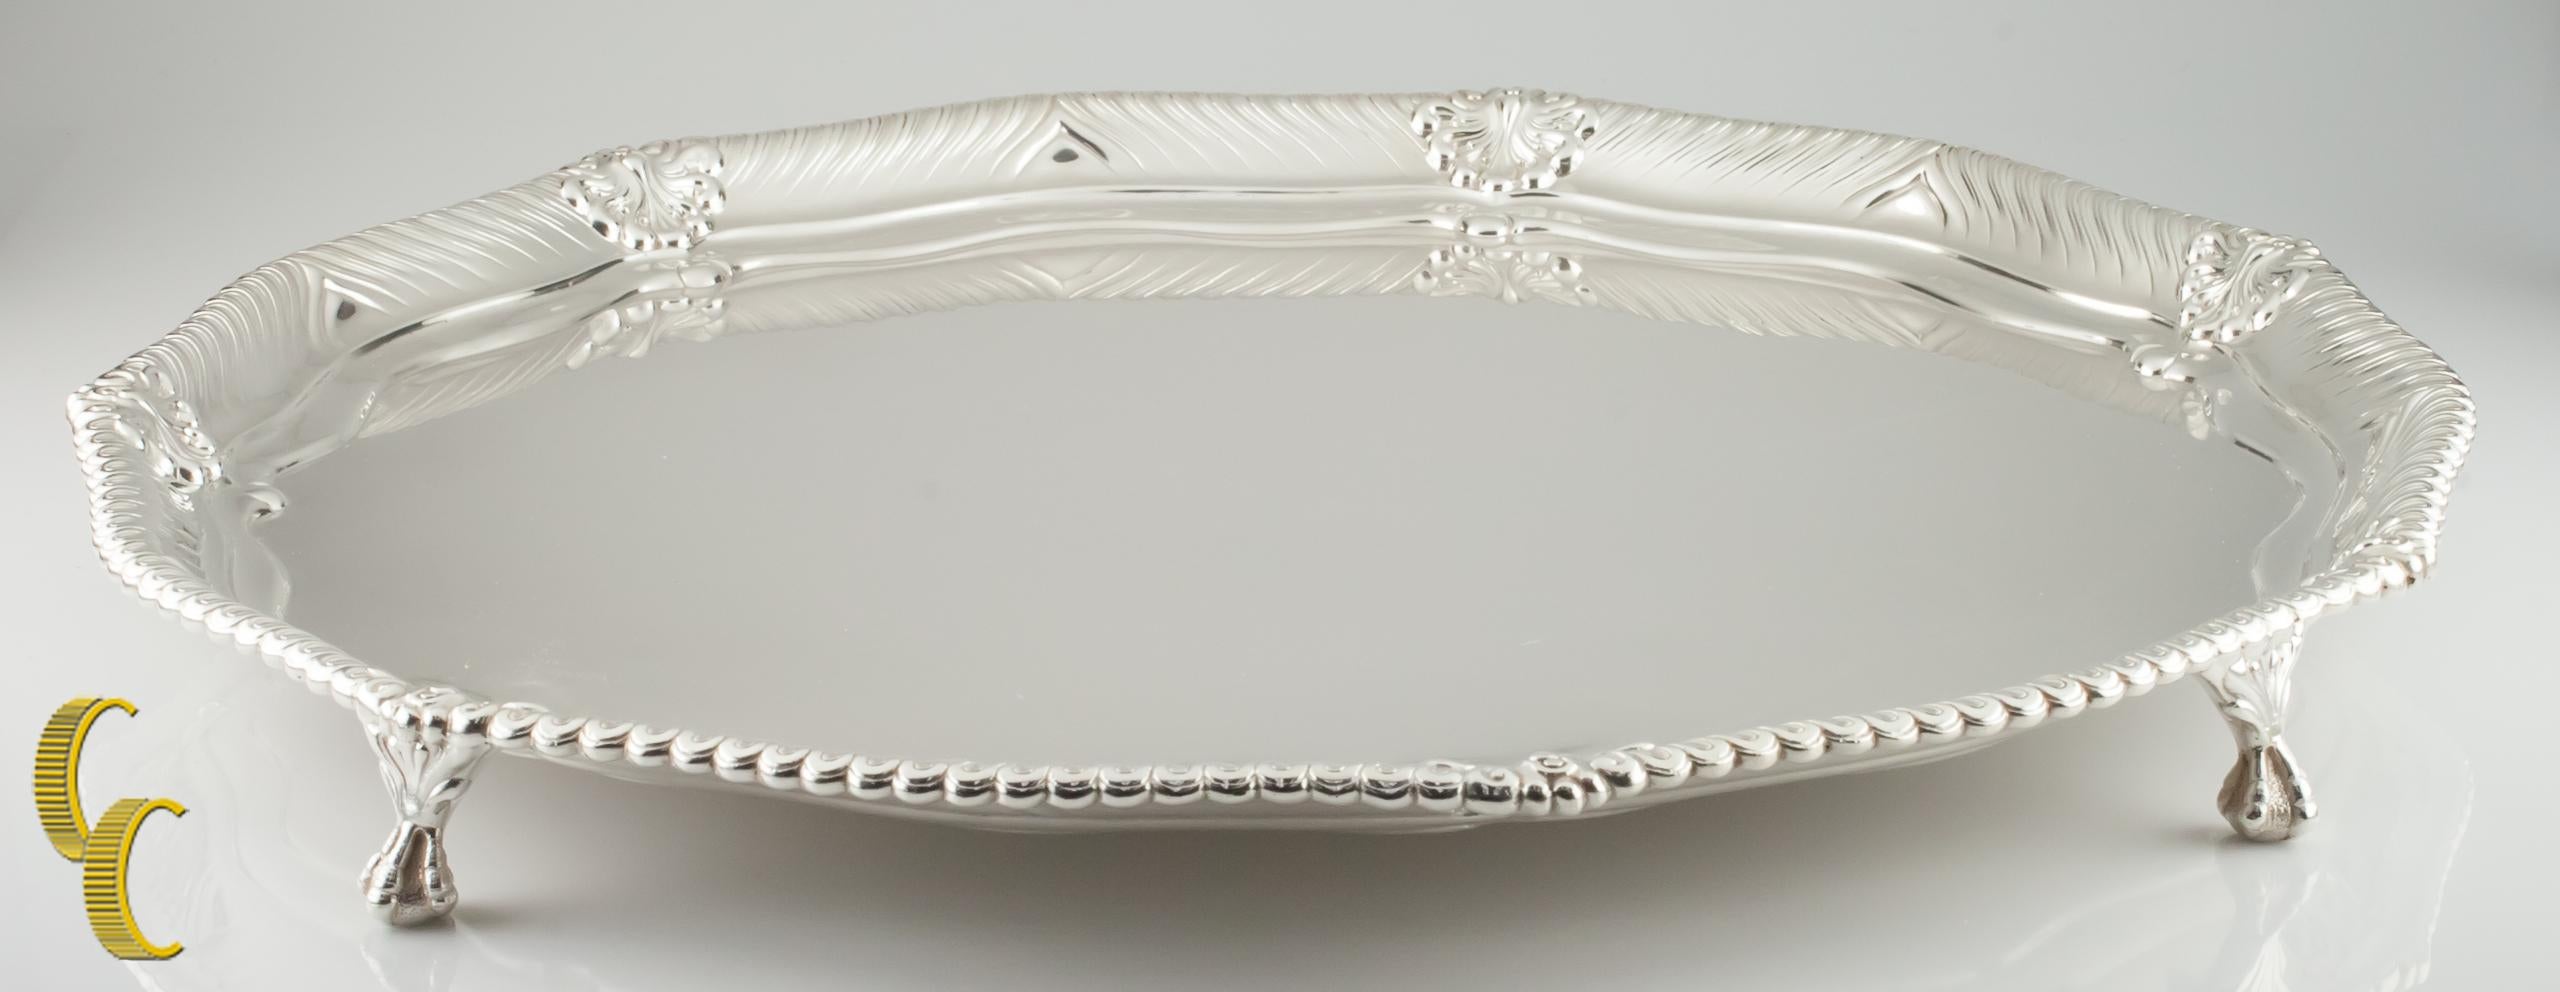 
Tiffany Makers Sterling Silver Large Footed Tray 1888 86.5 ounces Great Antique 

Gorgeous Seven-Sided Round Tiffany Sterling Silver Platter
Features Talon-motif on foots
Diameter: 18 3/4